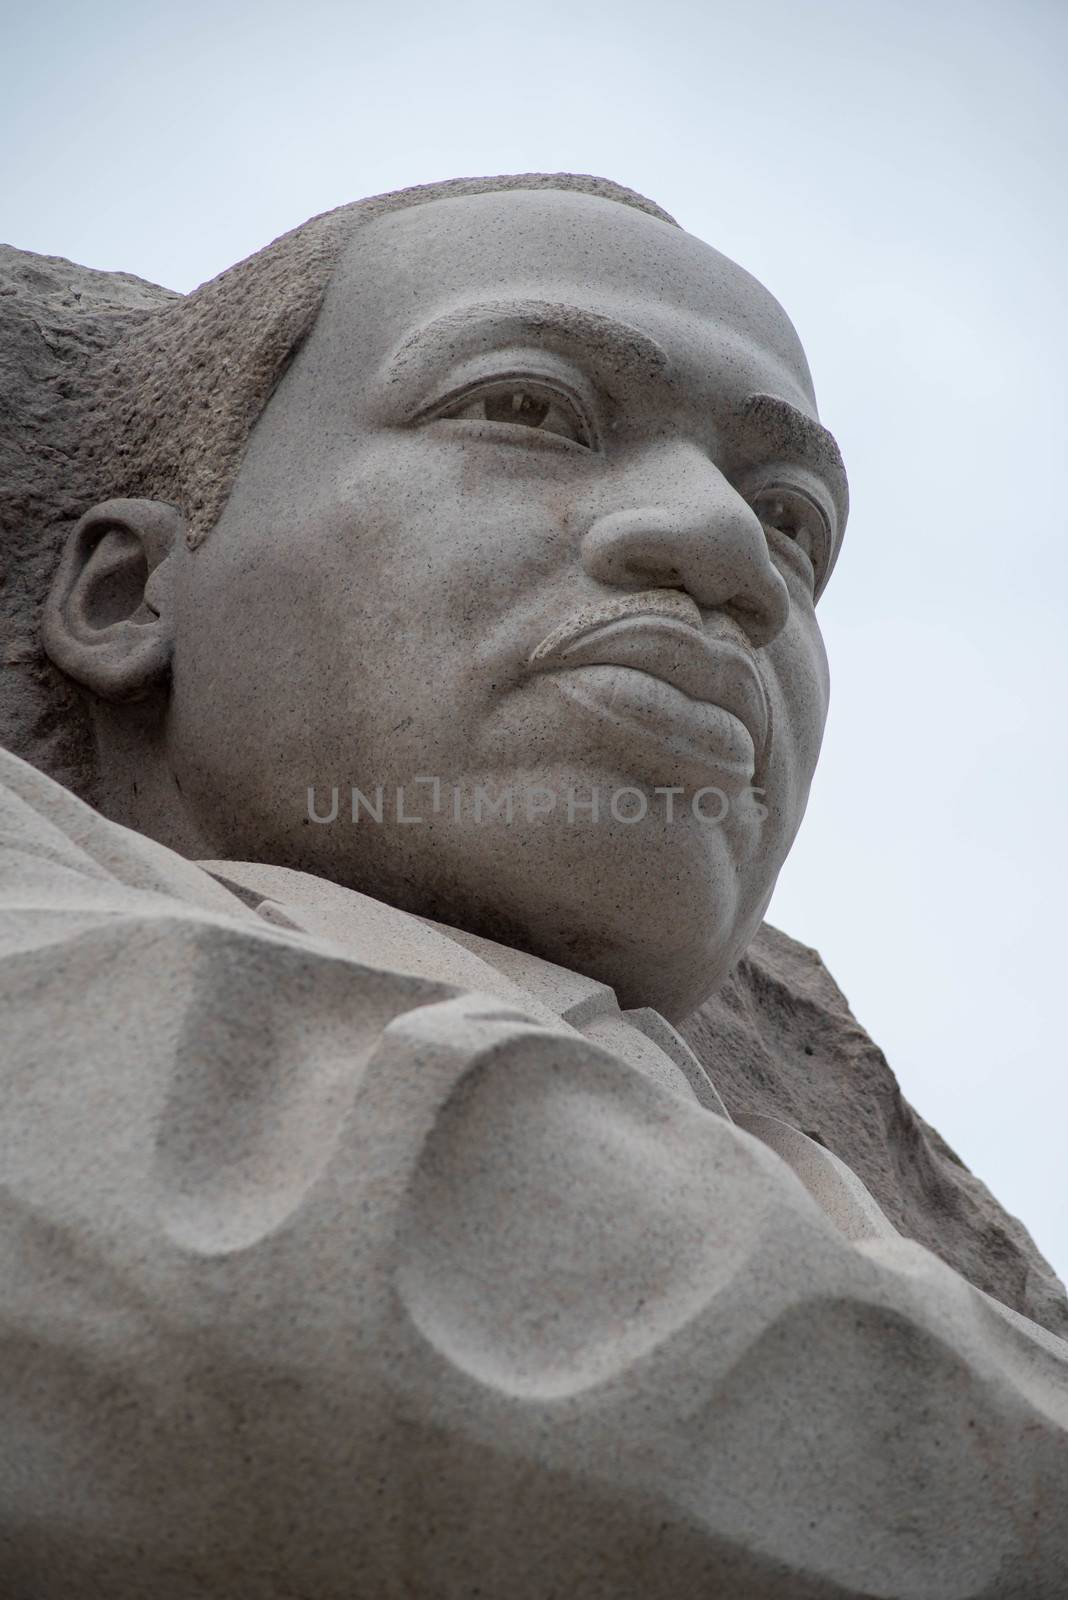 Dr. Martin Luther King Jr. monument in Washington DC by marysalen